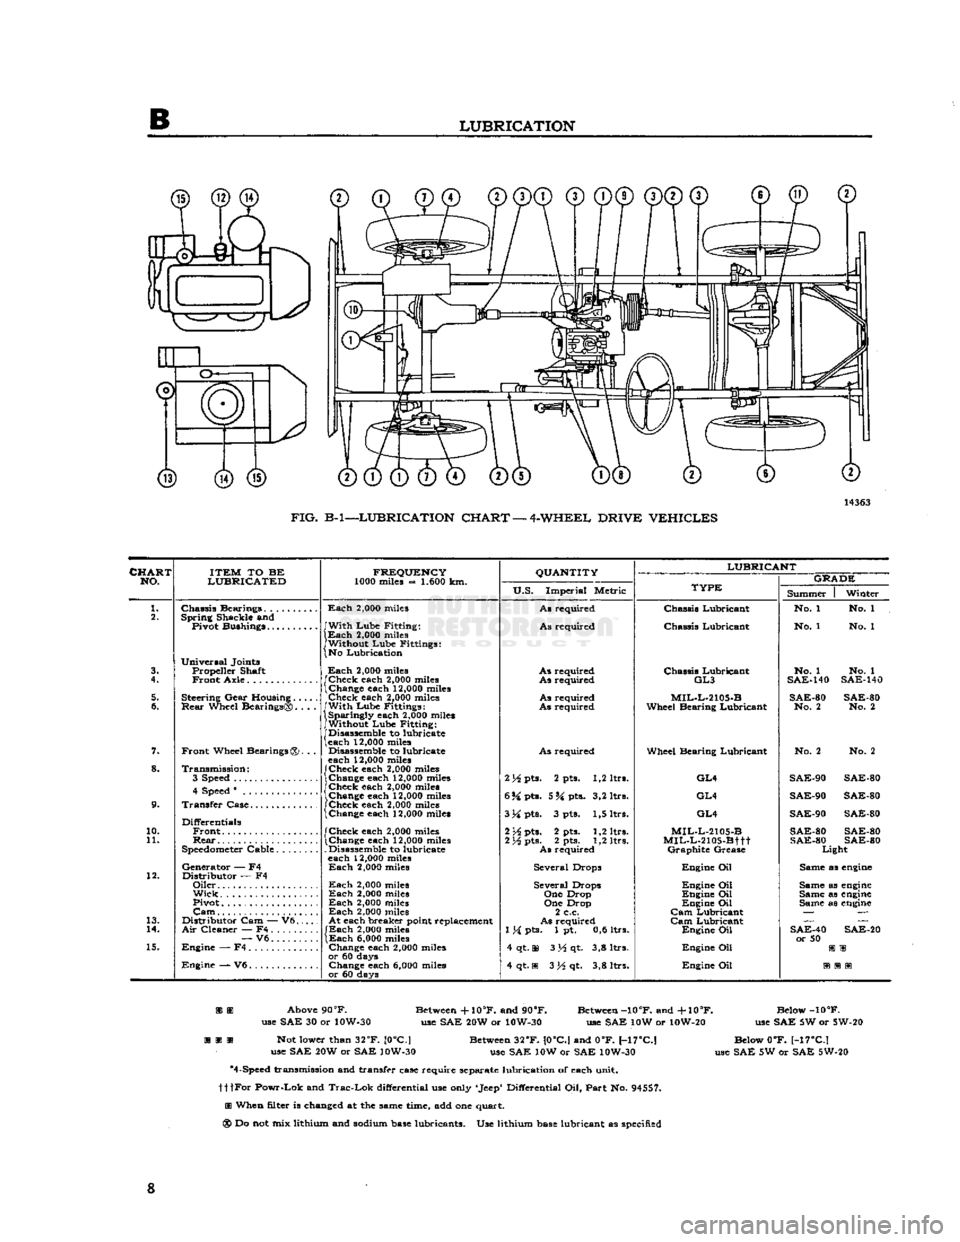 JEEP DJ 1953  Service Manual 
B 
LUBRICATION  D0®
 ® ® ® 

FIG.
 B-l—-LUBRICATION CHART
 —
 4-WHEEL DRIVE
 VEHICLES 

CHART  NO. 
 ITEM
 TO BE 

LUBRICATED 

10. 
11. 
13. 
14. 
 Chassis
 Bearings. . . 

Spring
 Shackle a